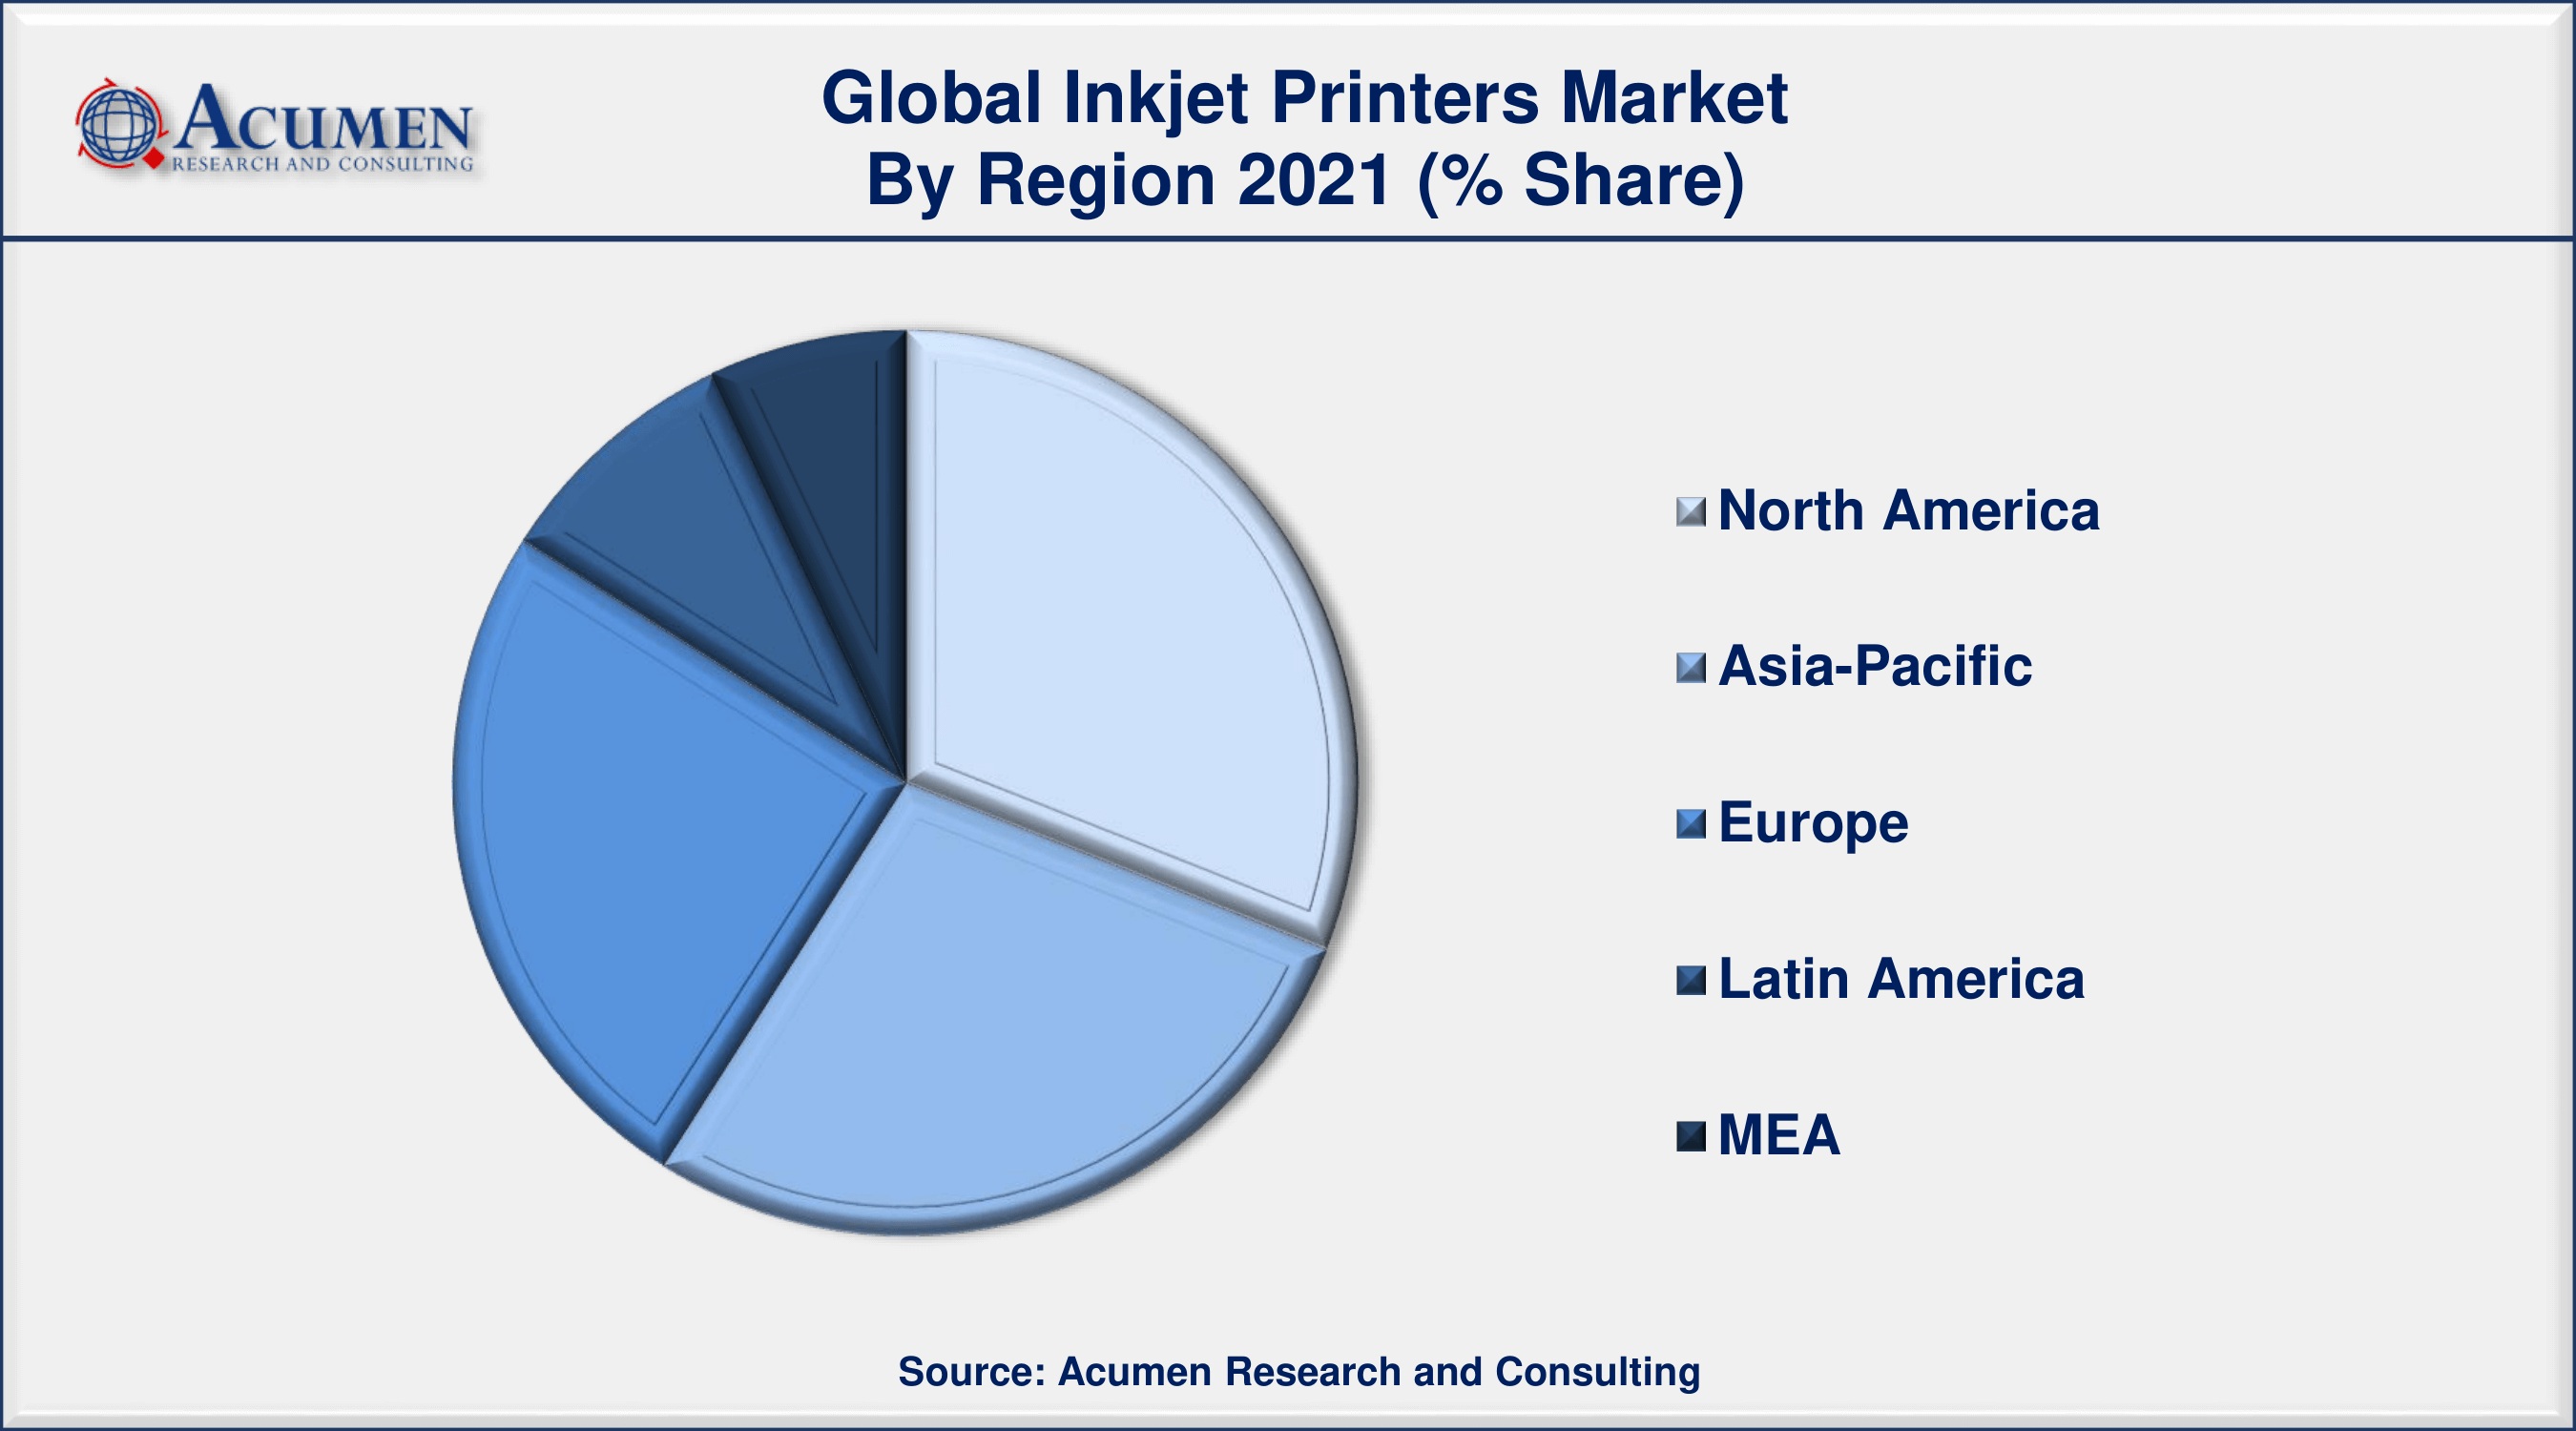 By technology, continuous inkjet segment generated about 35% market share in 2021